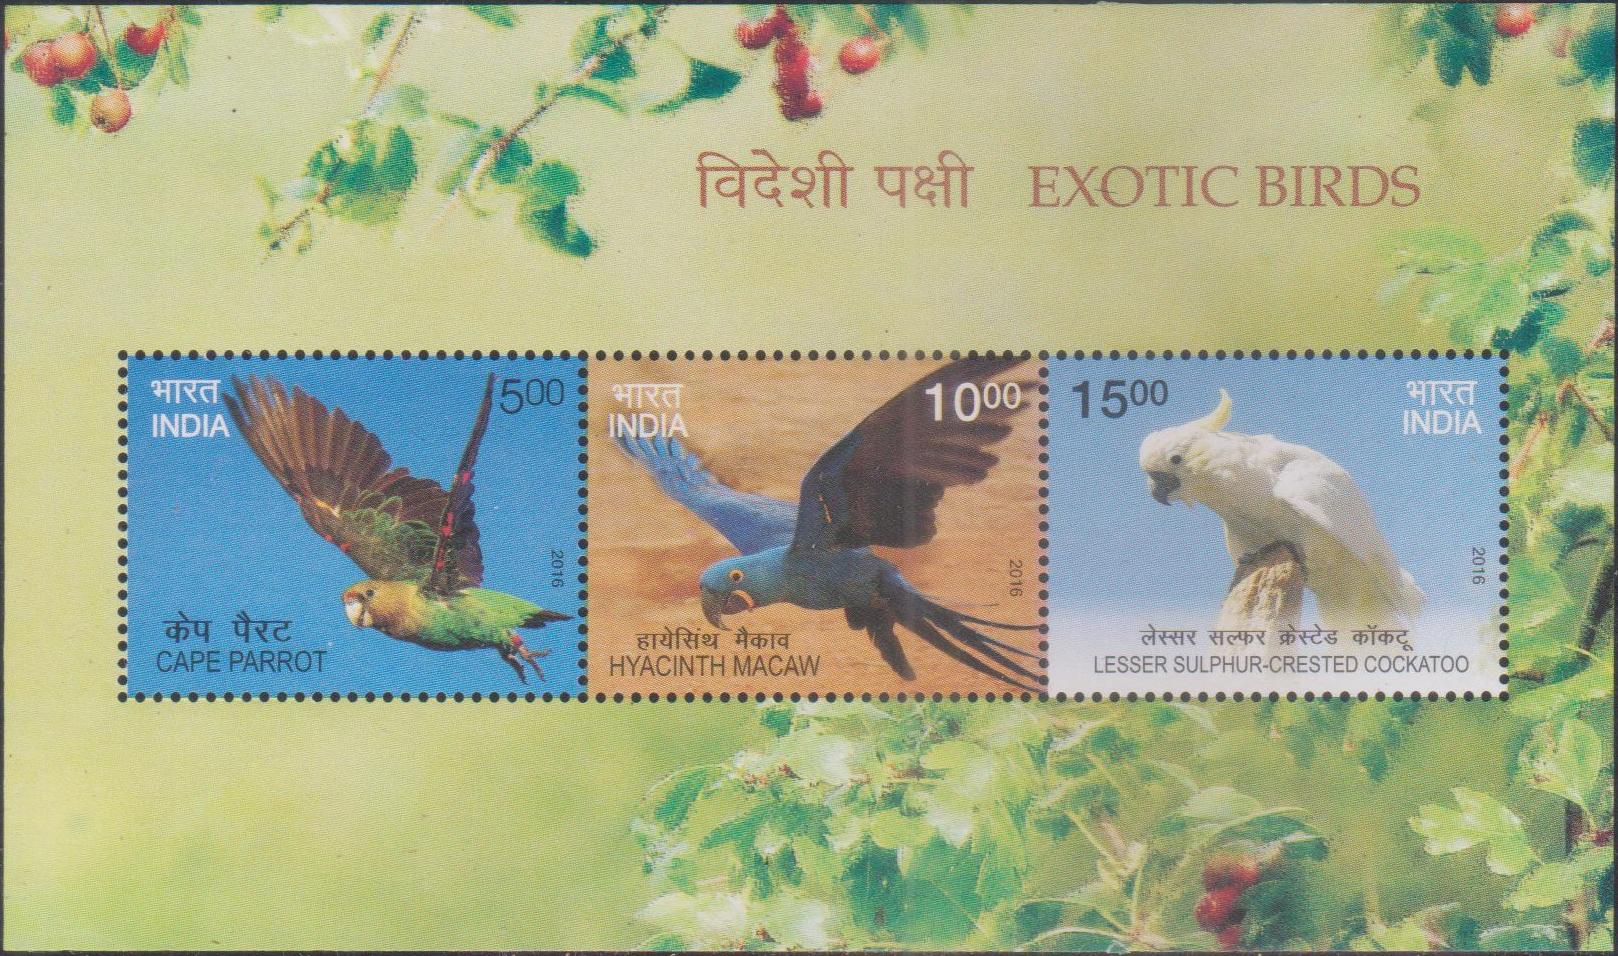 Cape Parrot, Hyacinth Macaw and Yellow-crested Cockatoo